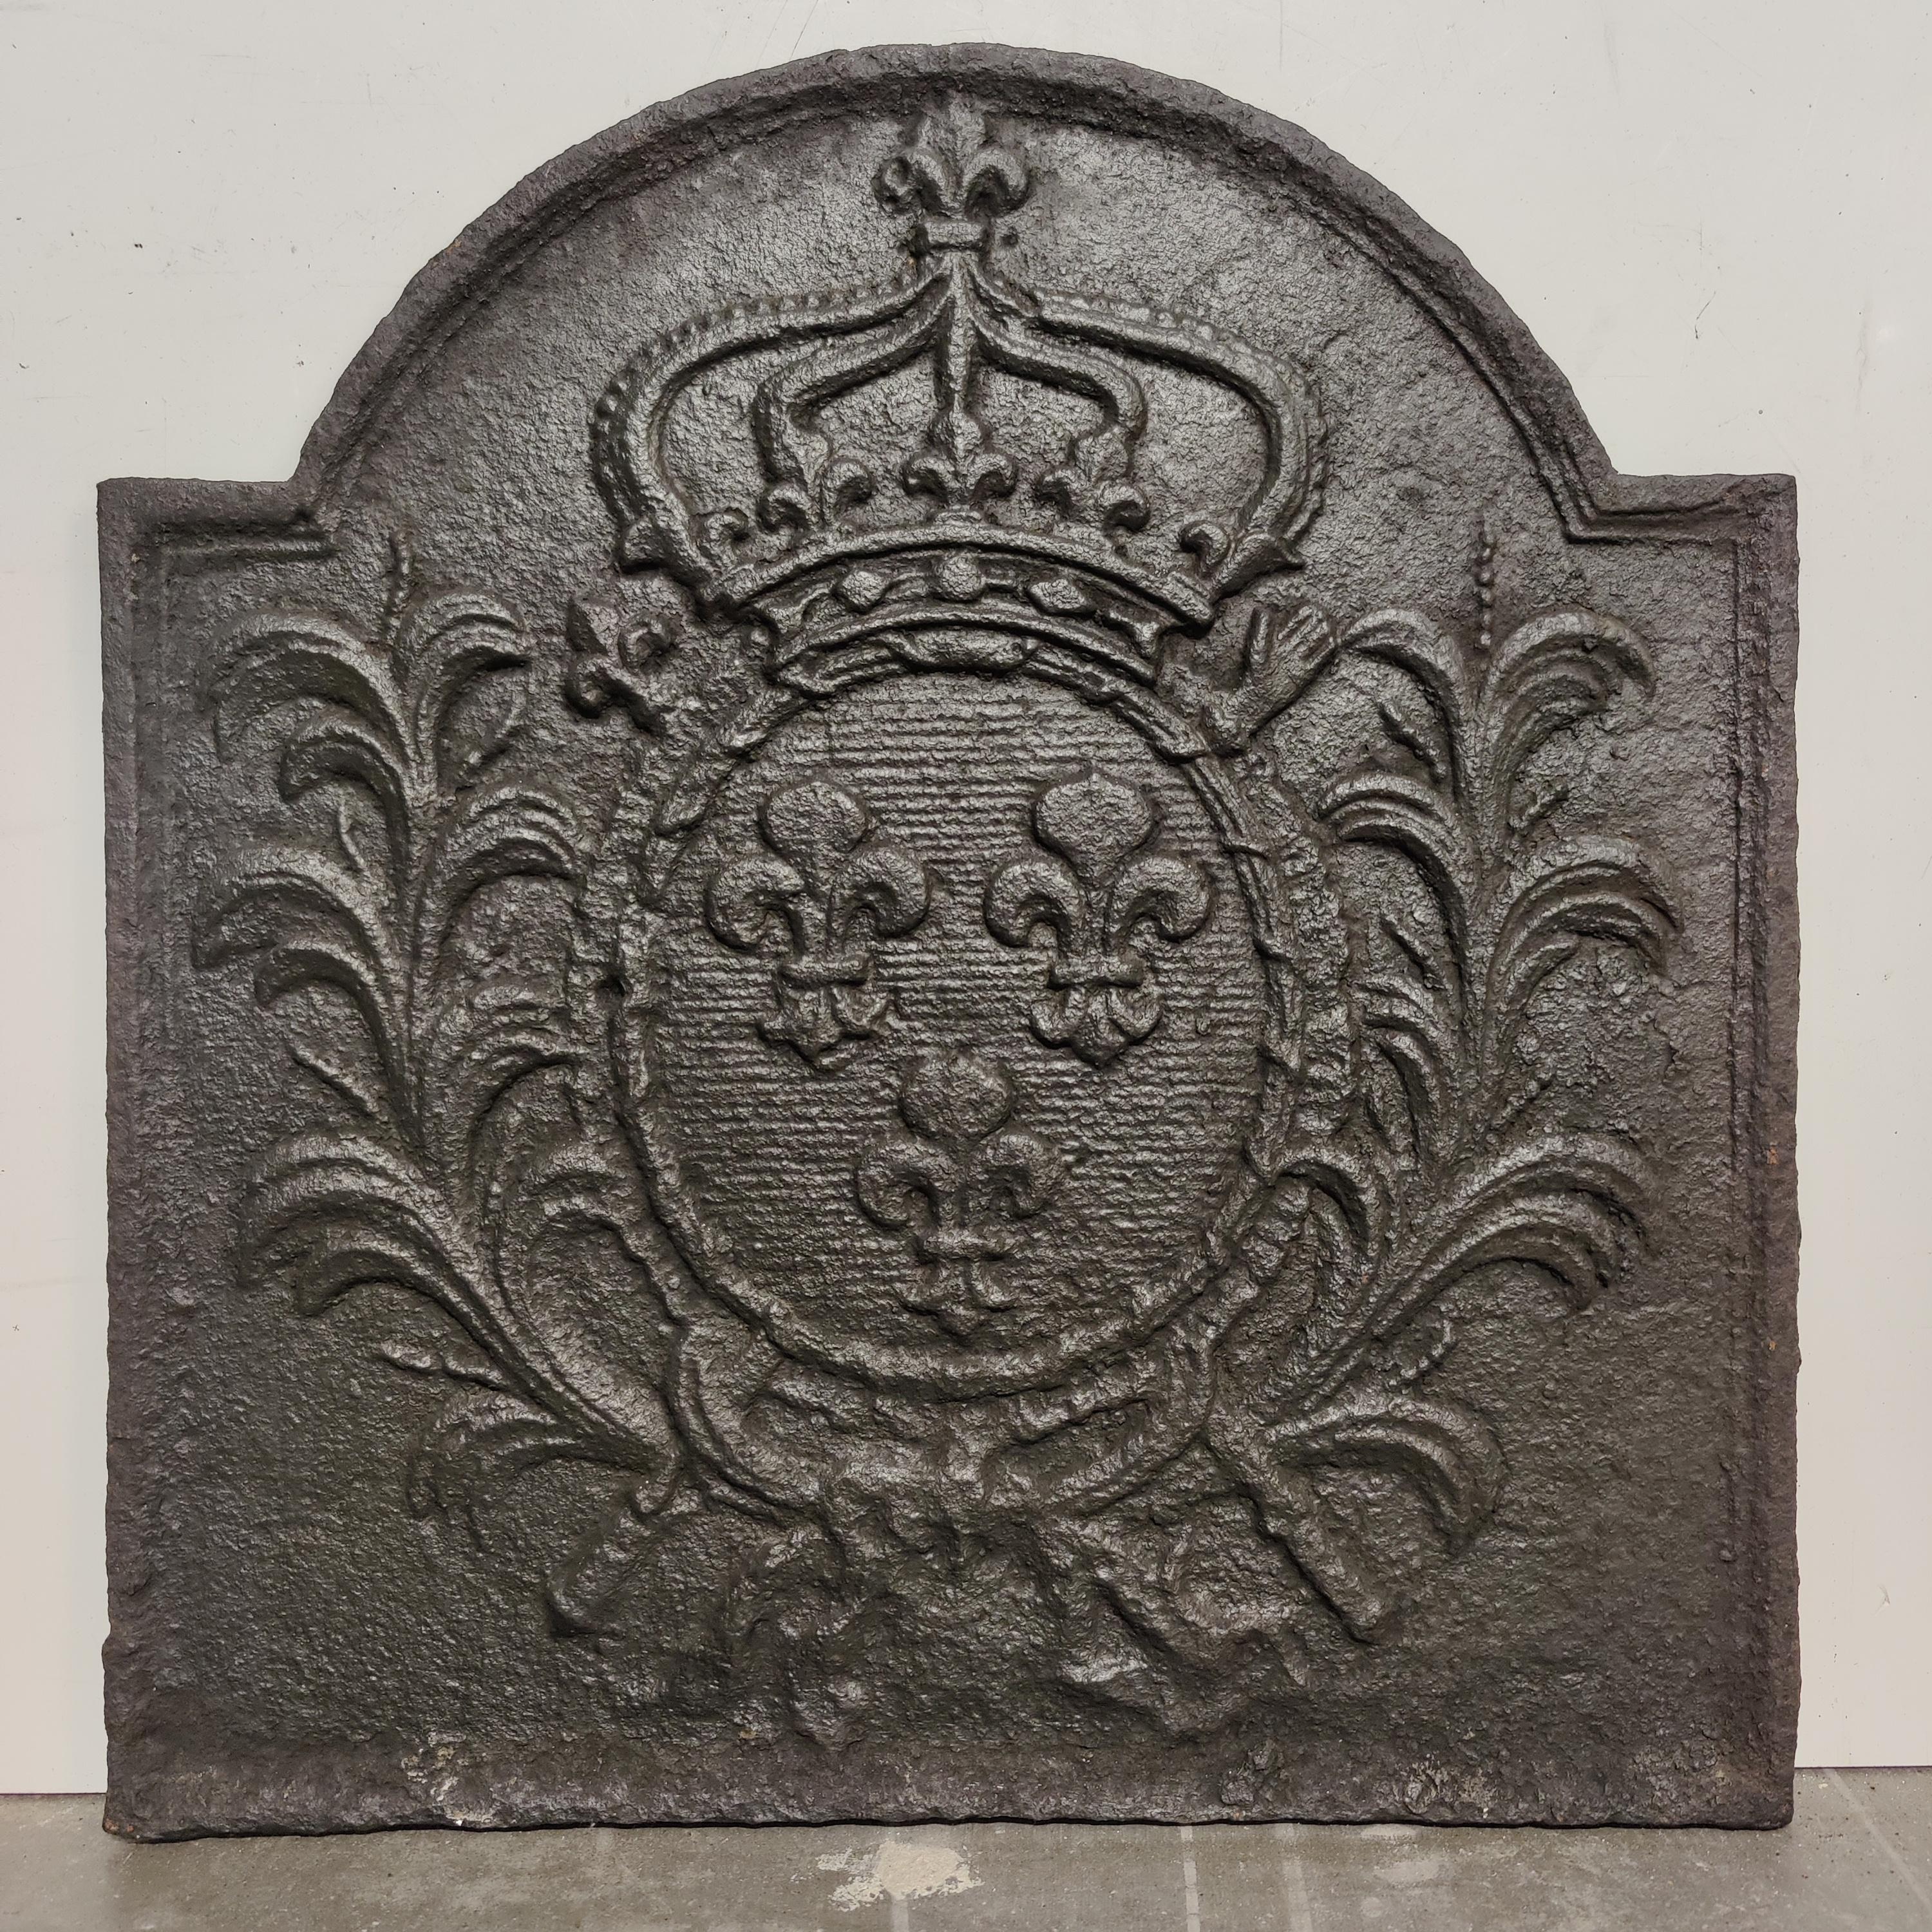 Antique fireback / backsplash, coat of arms house bourbon.

Nice cast iron antique fireback displaying the coat of arms of House Bourbon.
A European dynasty of French origin, a branch of the Capetian dynasty, the royal House of France.
Great